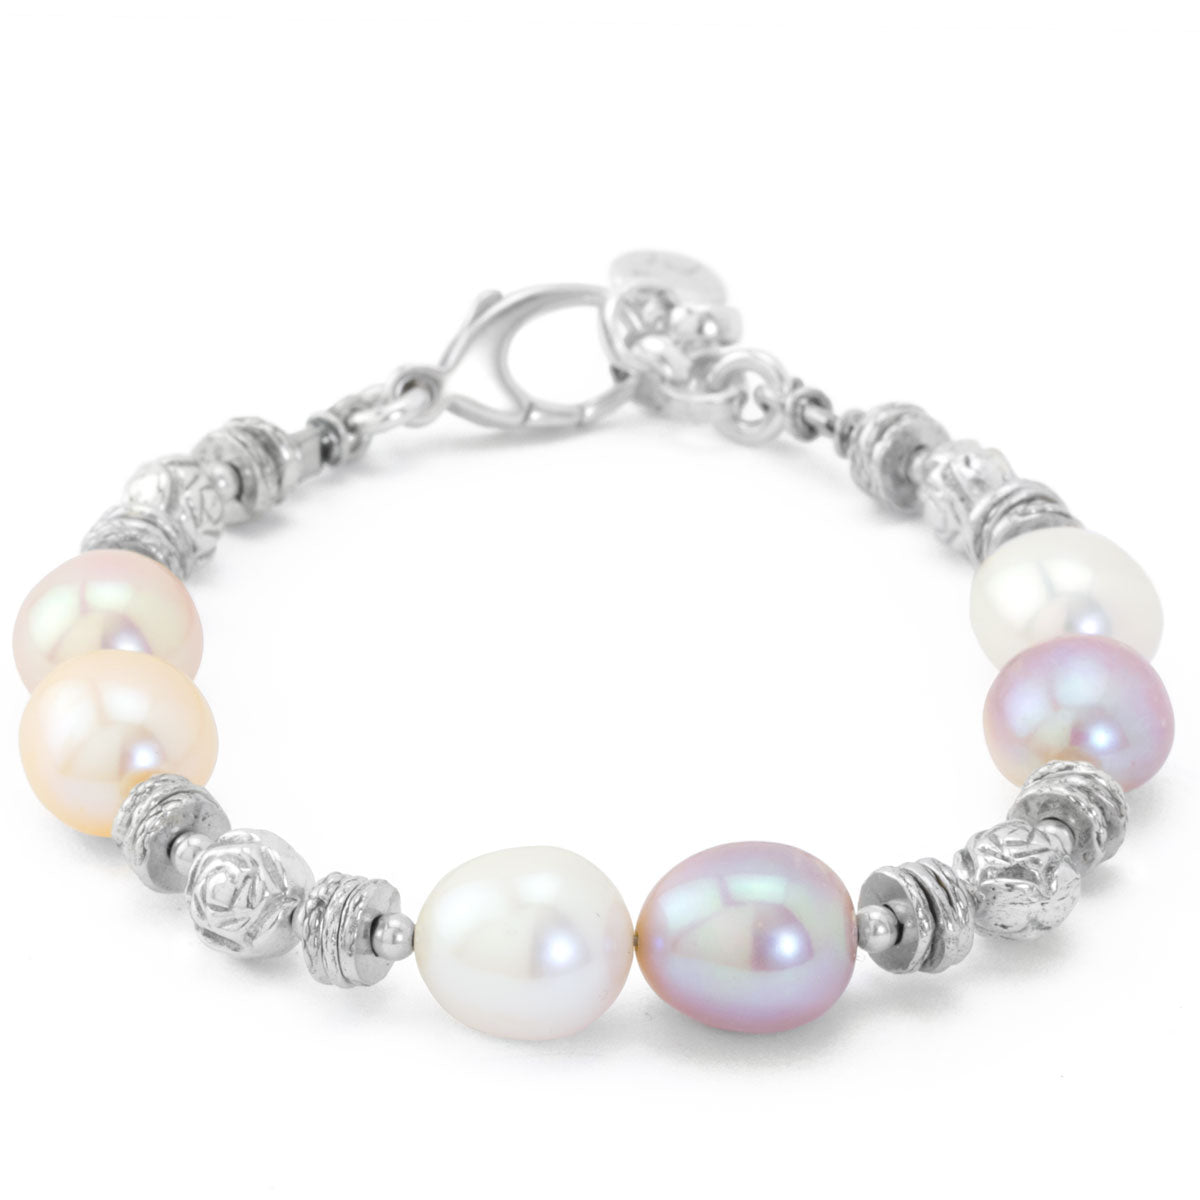 The Goddess Collection Pearl Bracelet